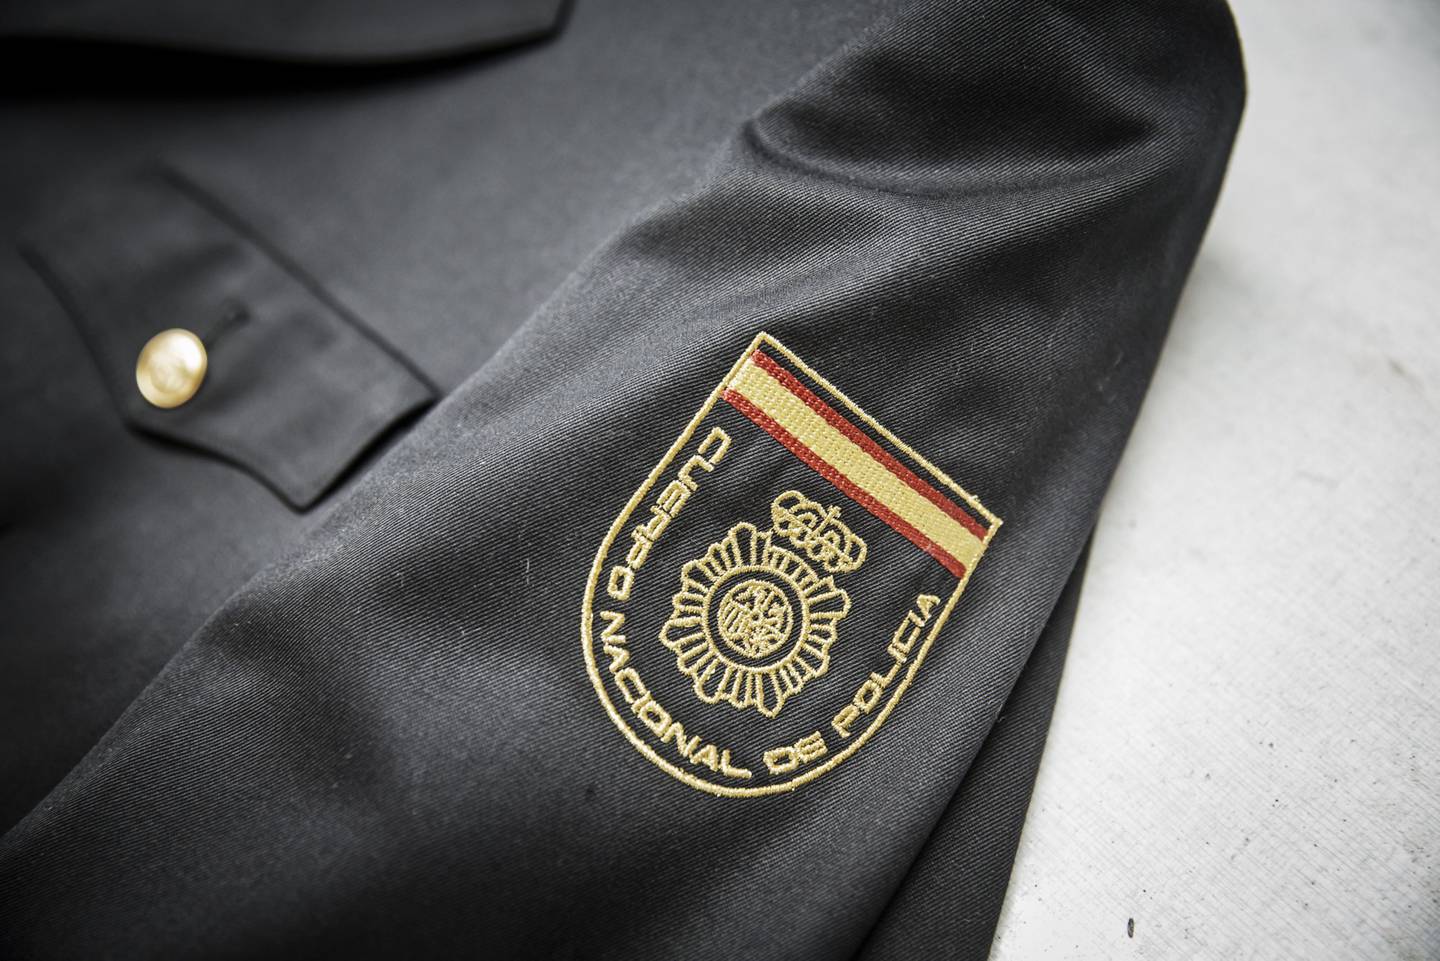 The logo of the Cuerpo Nacional de Policia, the Spanish civilian police force, is displayed on a jacket at the Shandong Ruyi Technology Group in Jining, China, on Monday, May 30, 2016. Shandong got a boost in the past from its proximity to Japan and South Korea, the source of much of its early investment. Now, it's trying to maintain the high growth rate needed to make the same leap they did: from middle- to high-income status. Photographer: Qilai Shen/Bloomberg